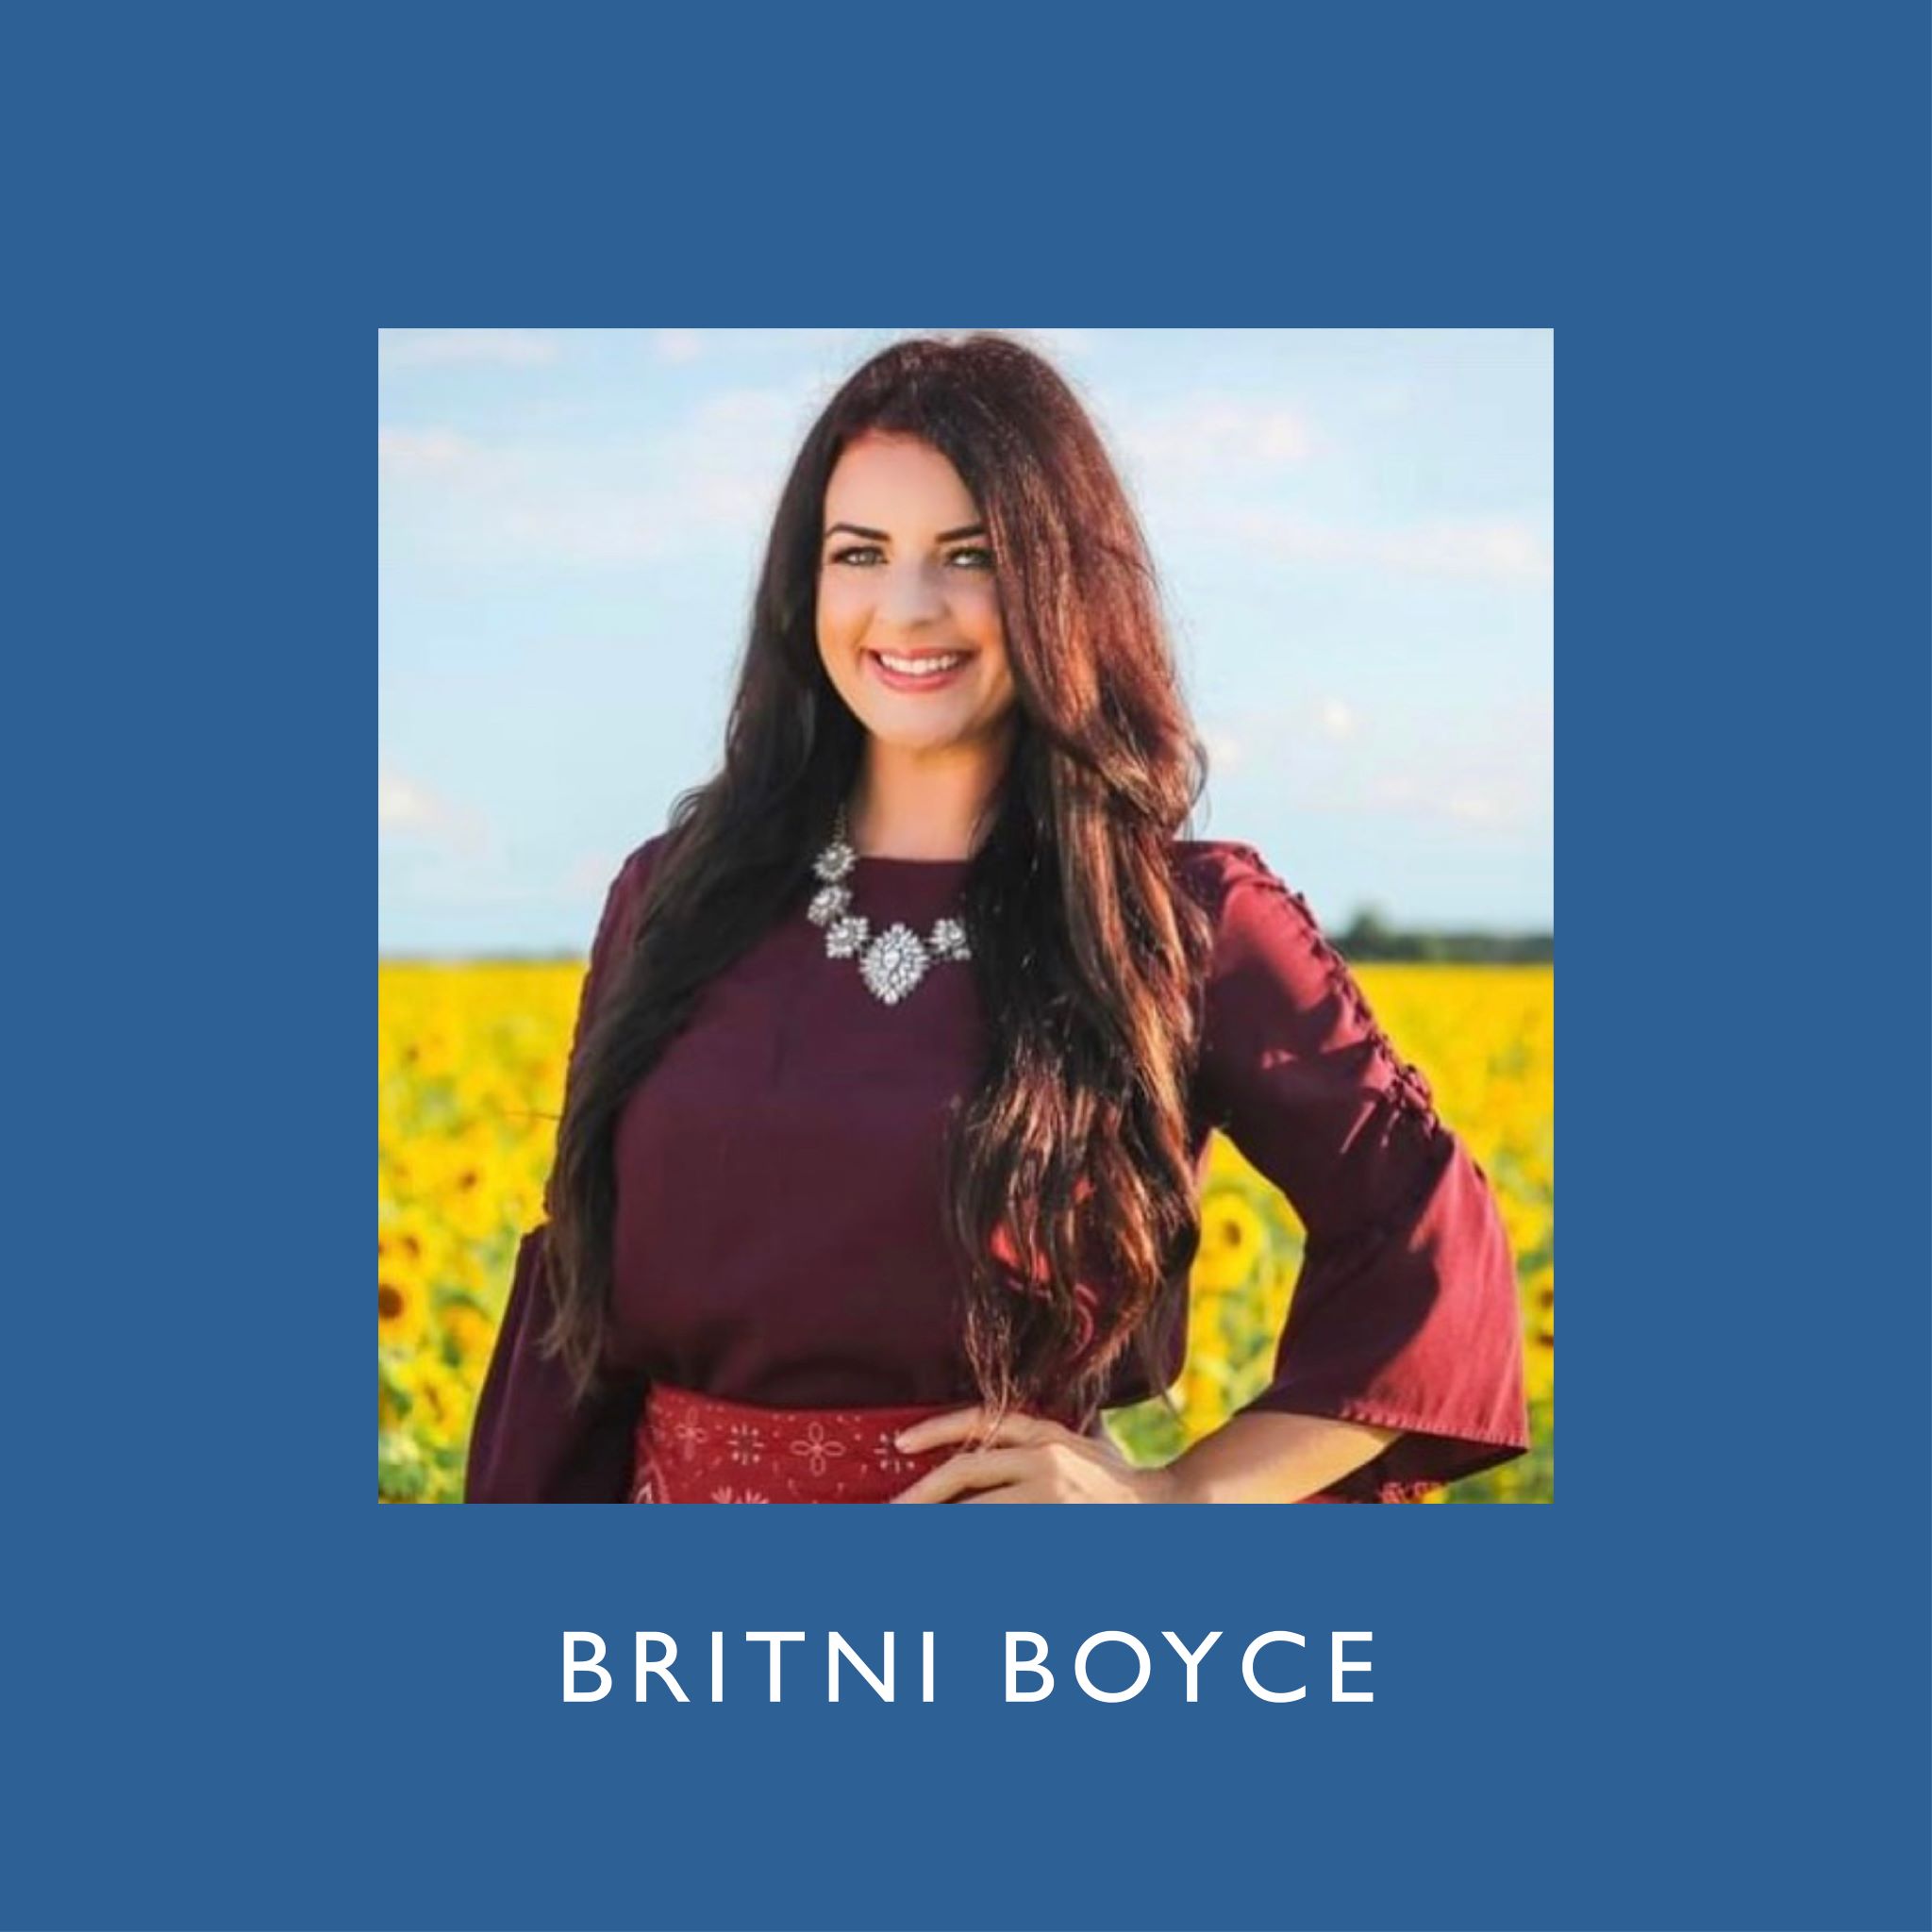 Britni Boyce: A Woman Addicted to Drugs Embraces Freedom Beyond Sobriety